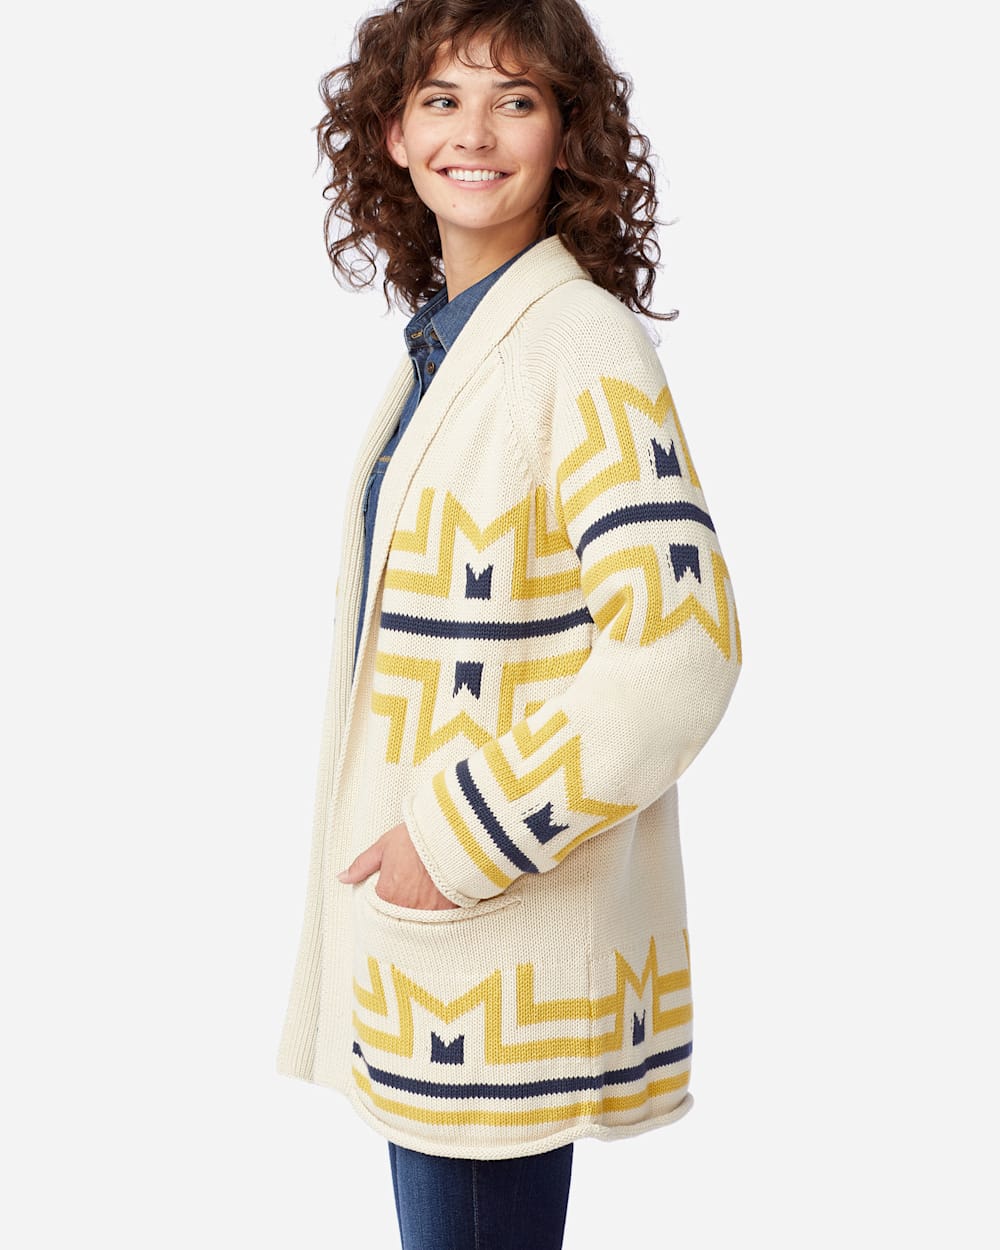 ALTERNATE VIEW OF WOMEN'S ROLLED EDGE COTTON CARDIGAN IN SANDSHELL image number 2